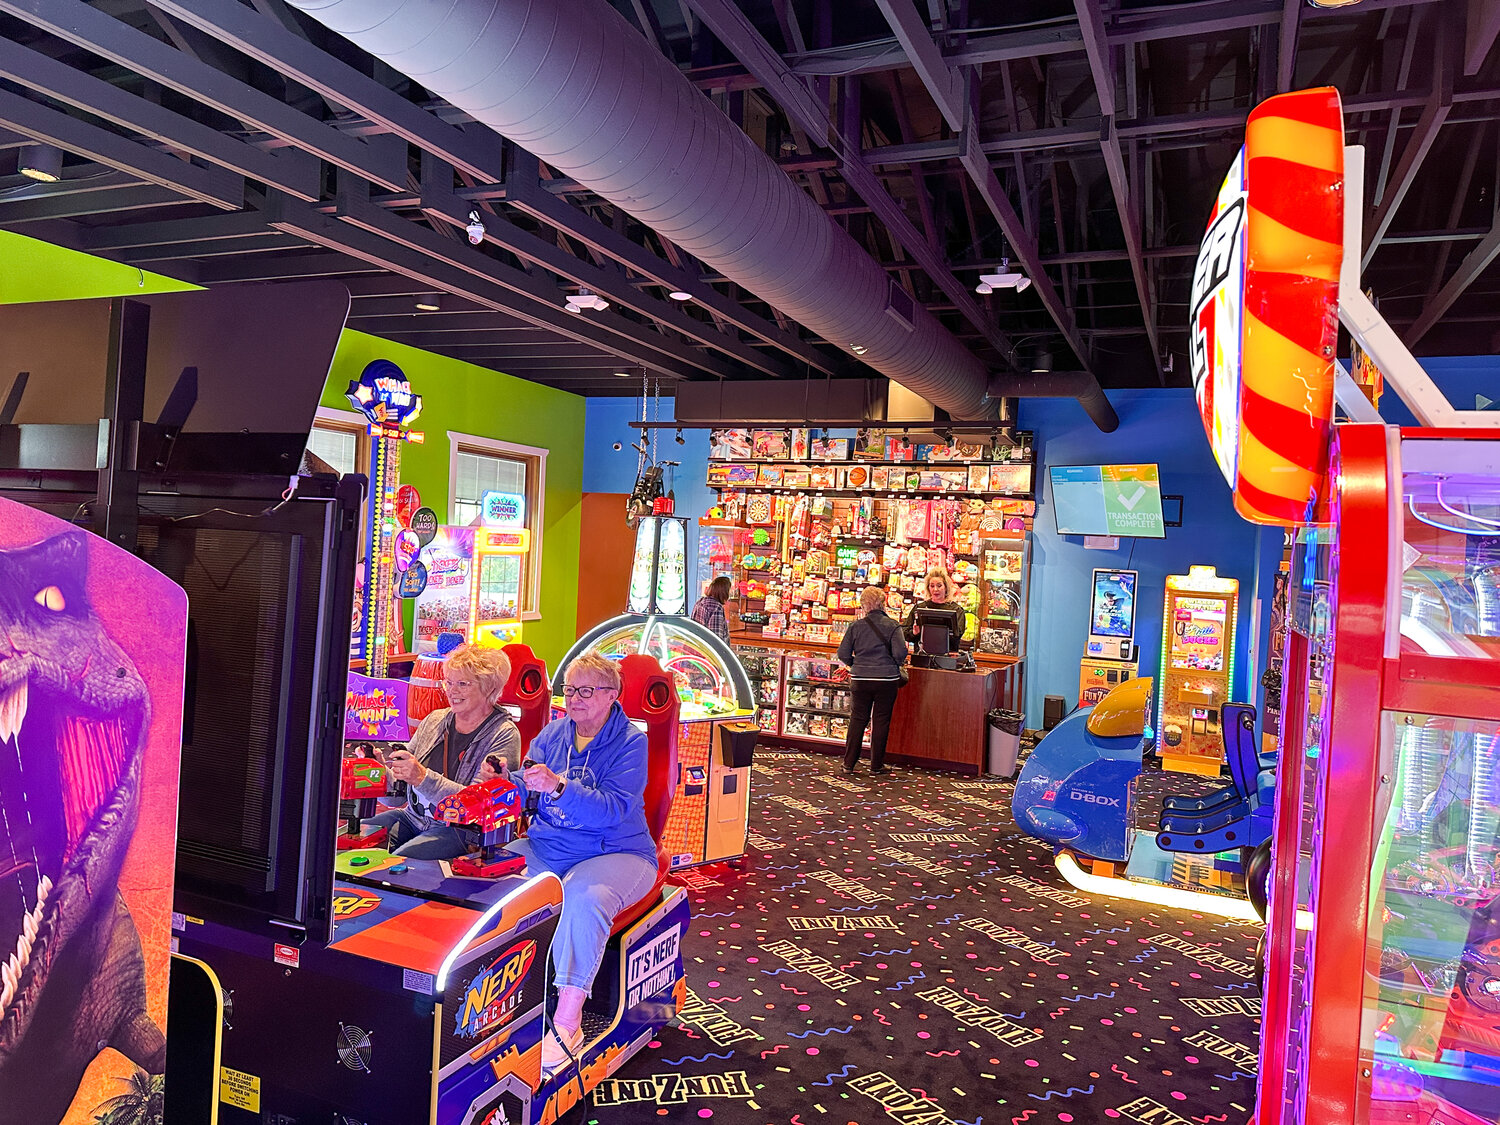 The FunZone has a lot of action packed in a small space. The space is laid out well to not feel cramped, it is bright and there are ample opportunities to earn tickets for prizes in fun ways.